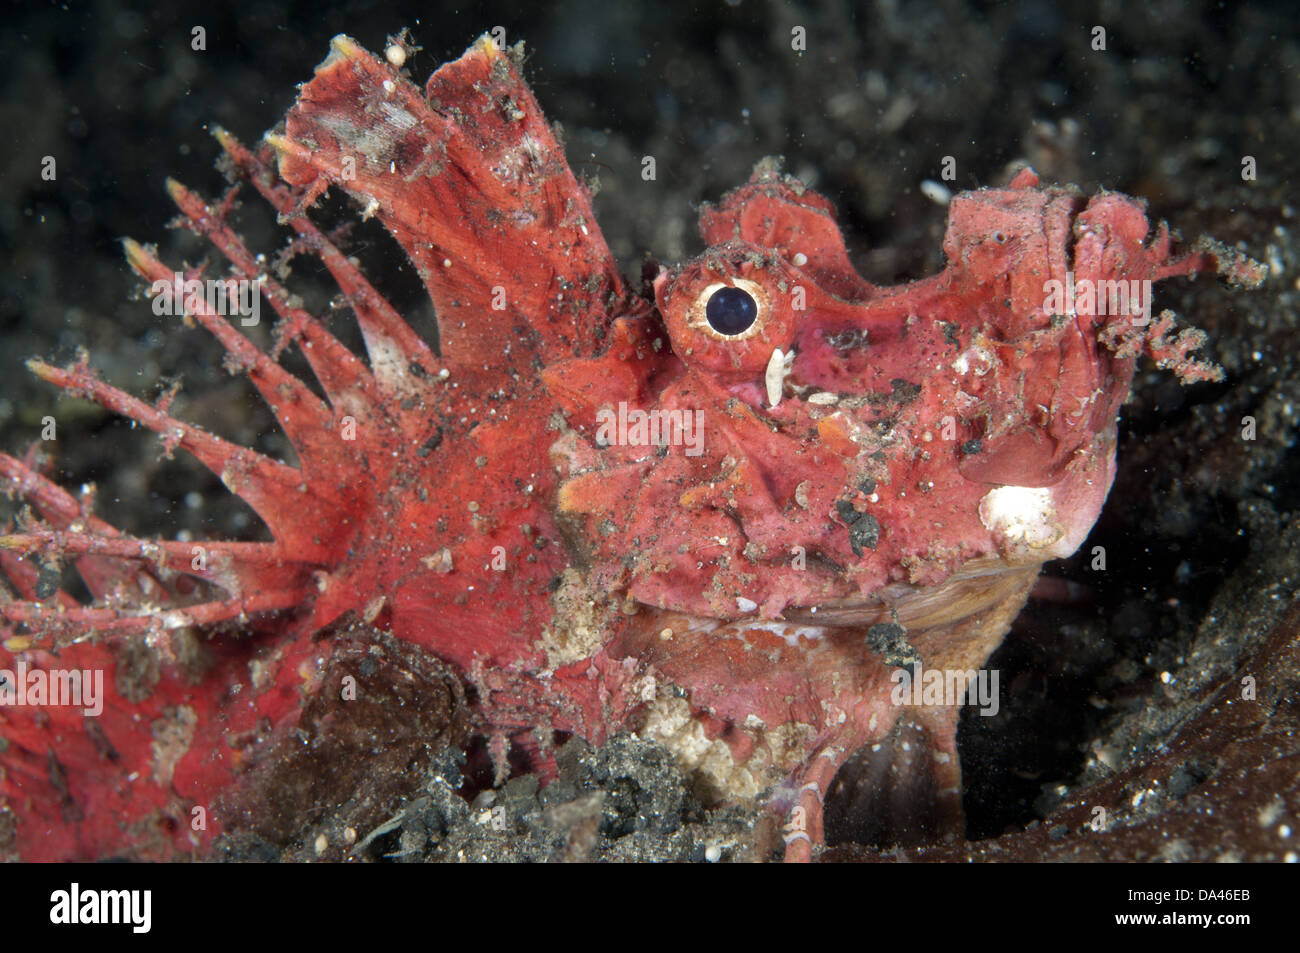 Red Spiny Devilfish (Inimicus didactylus) adult close-up of head at night Lembeh Straits Sulawesi Sunda Islands Indonesia May Stock Photo